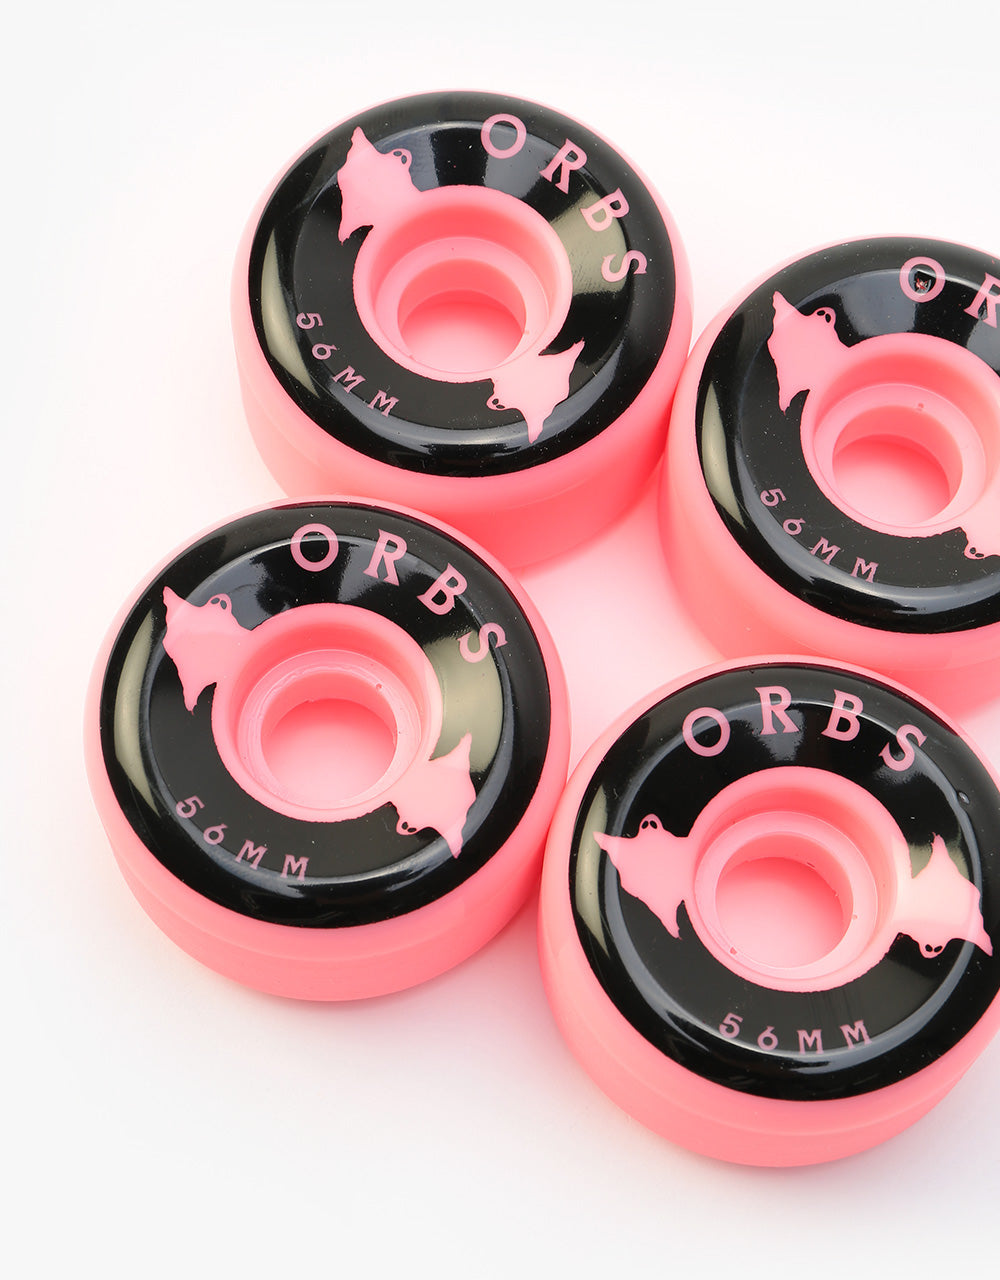 Orbs Specters Solids Conical 99a Skateboard Wheel - 56mm